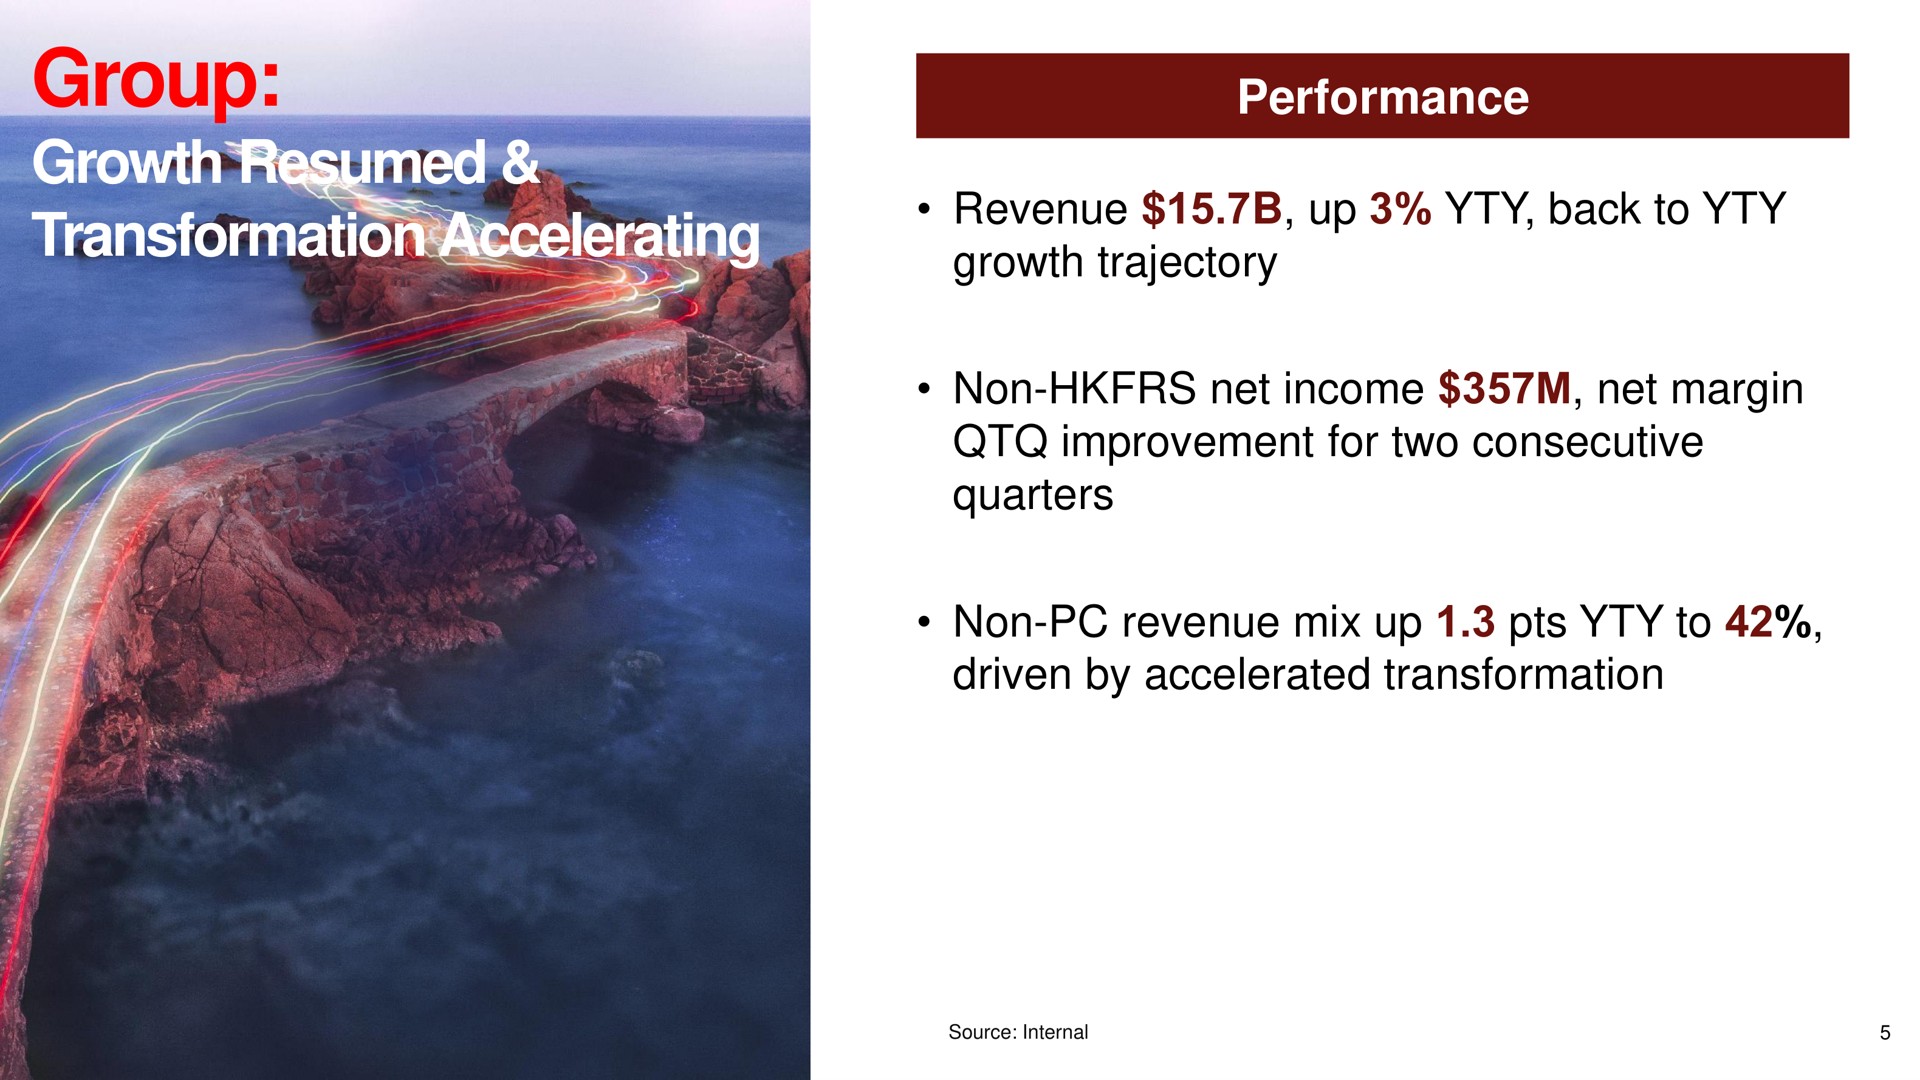 group growth resumed transformation accelerating performance revenue up back to non net income net margin improvement for two consecutive quarters driven by accelerated | Lenovo